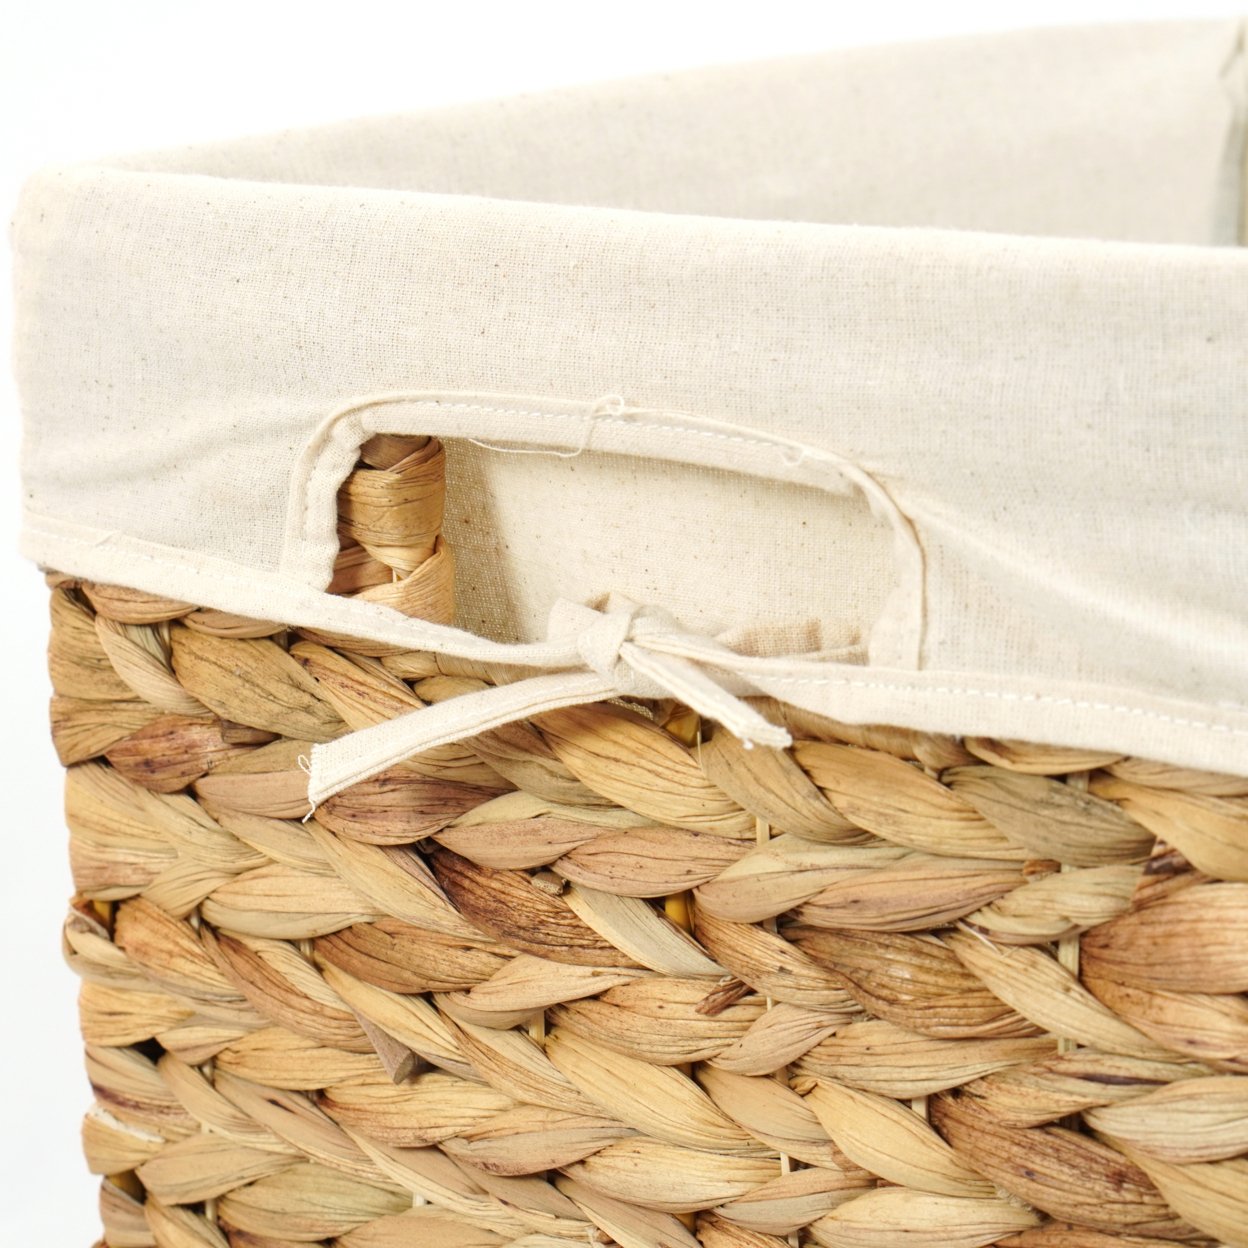 Handmade Rectangular Water Hyacinth Wicker Laundry Hamper With Lid Natural - Small